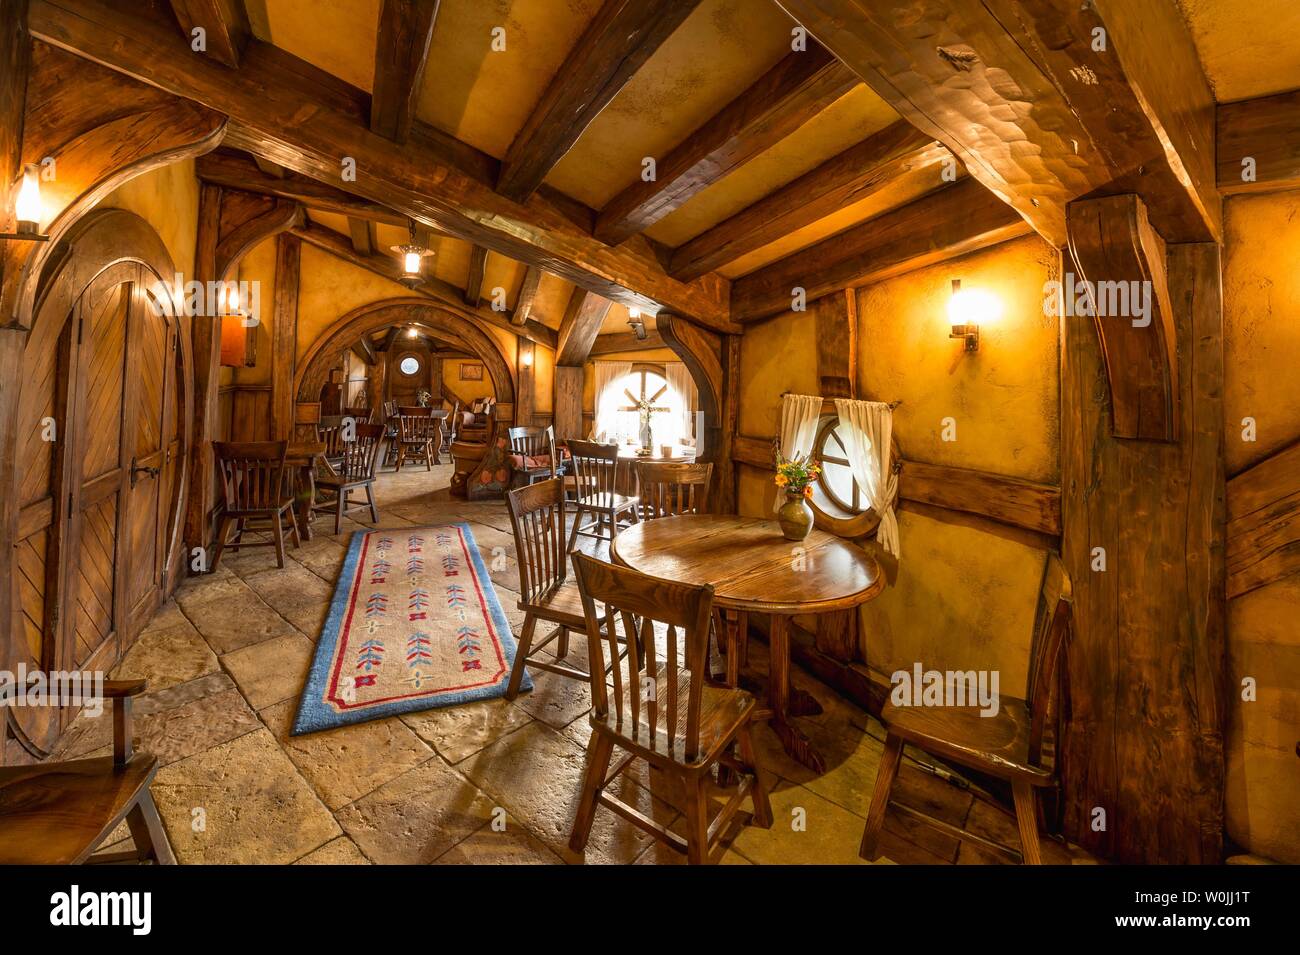 Interior view of the bar The Green Dragon Inn, Hobbiton in the Shire, filming location for Lord of the Rings and The Hobbit, Matamata, Waikato, North Stock Photo